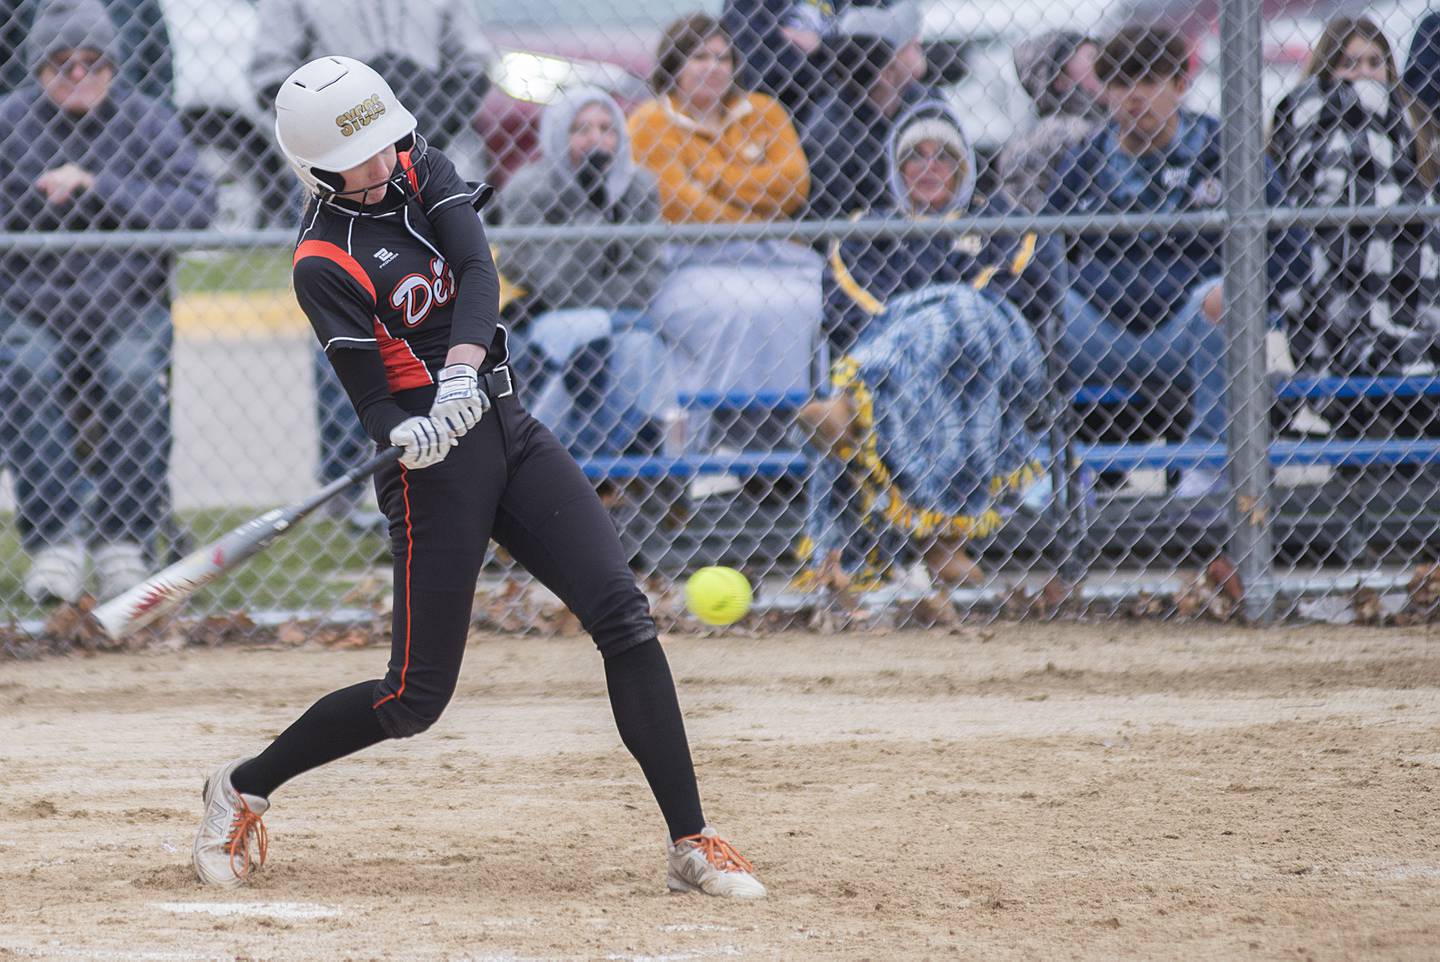 DeKalb's Lauren Gates drives the ball hard but right at the shortstop for an out  April 4, 2022 against Sterling.